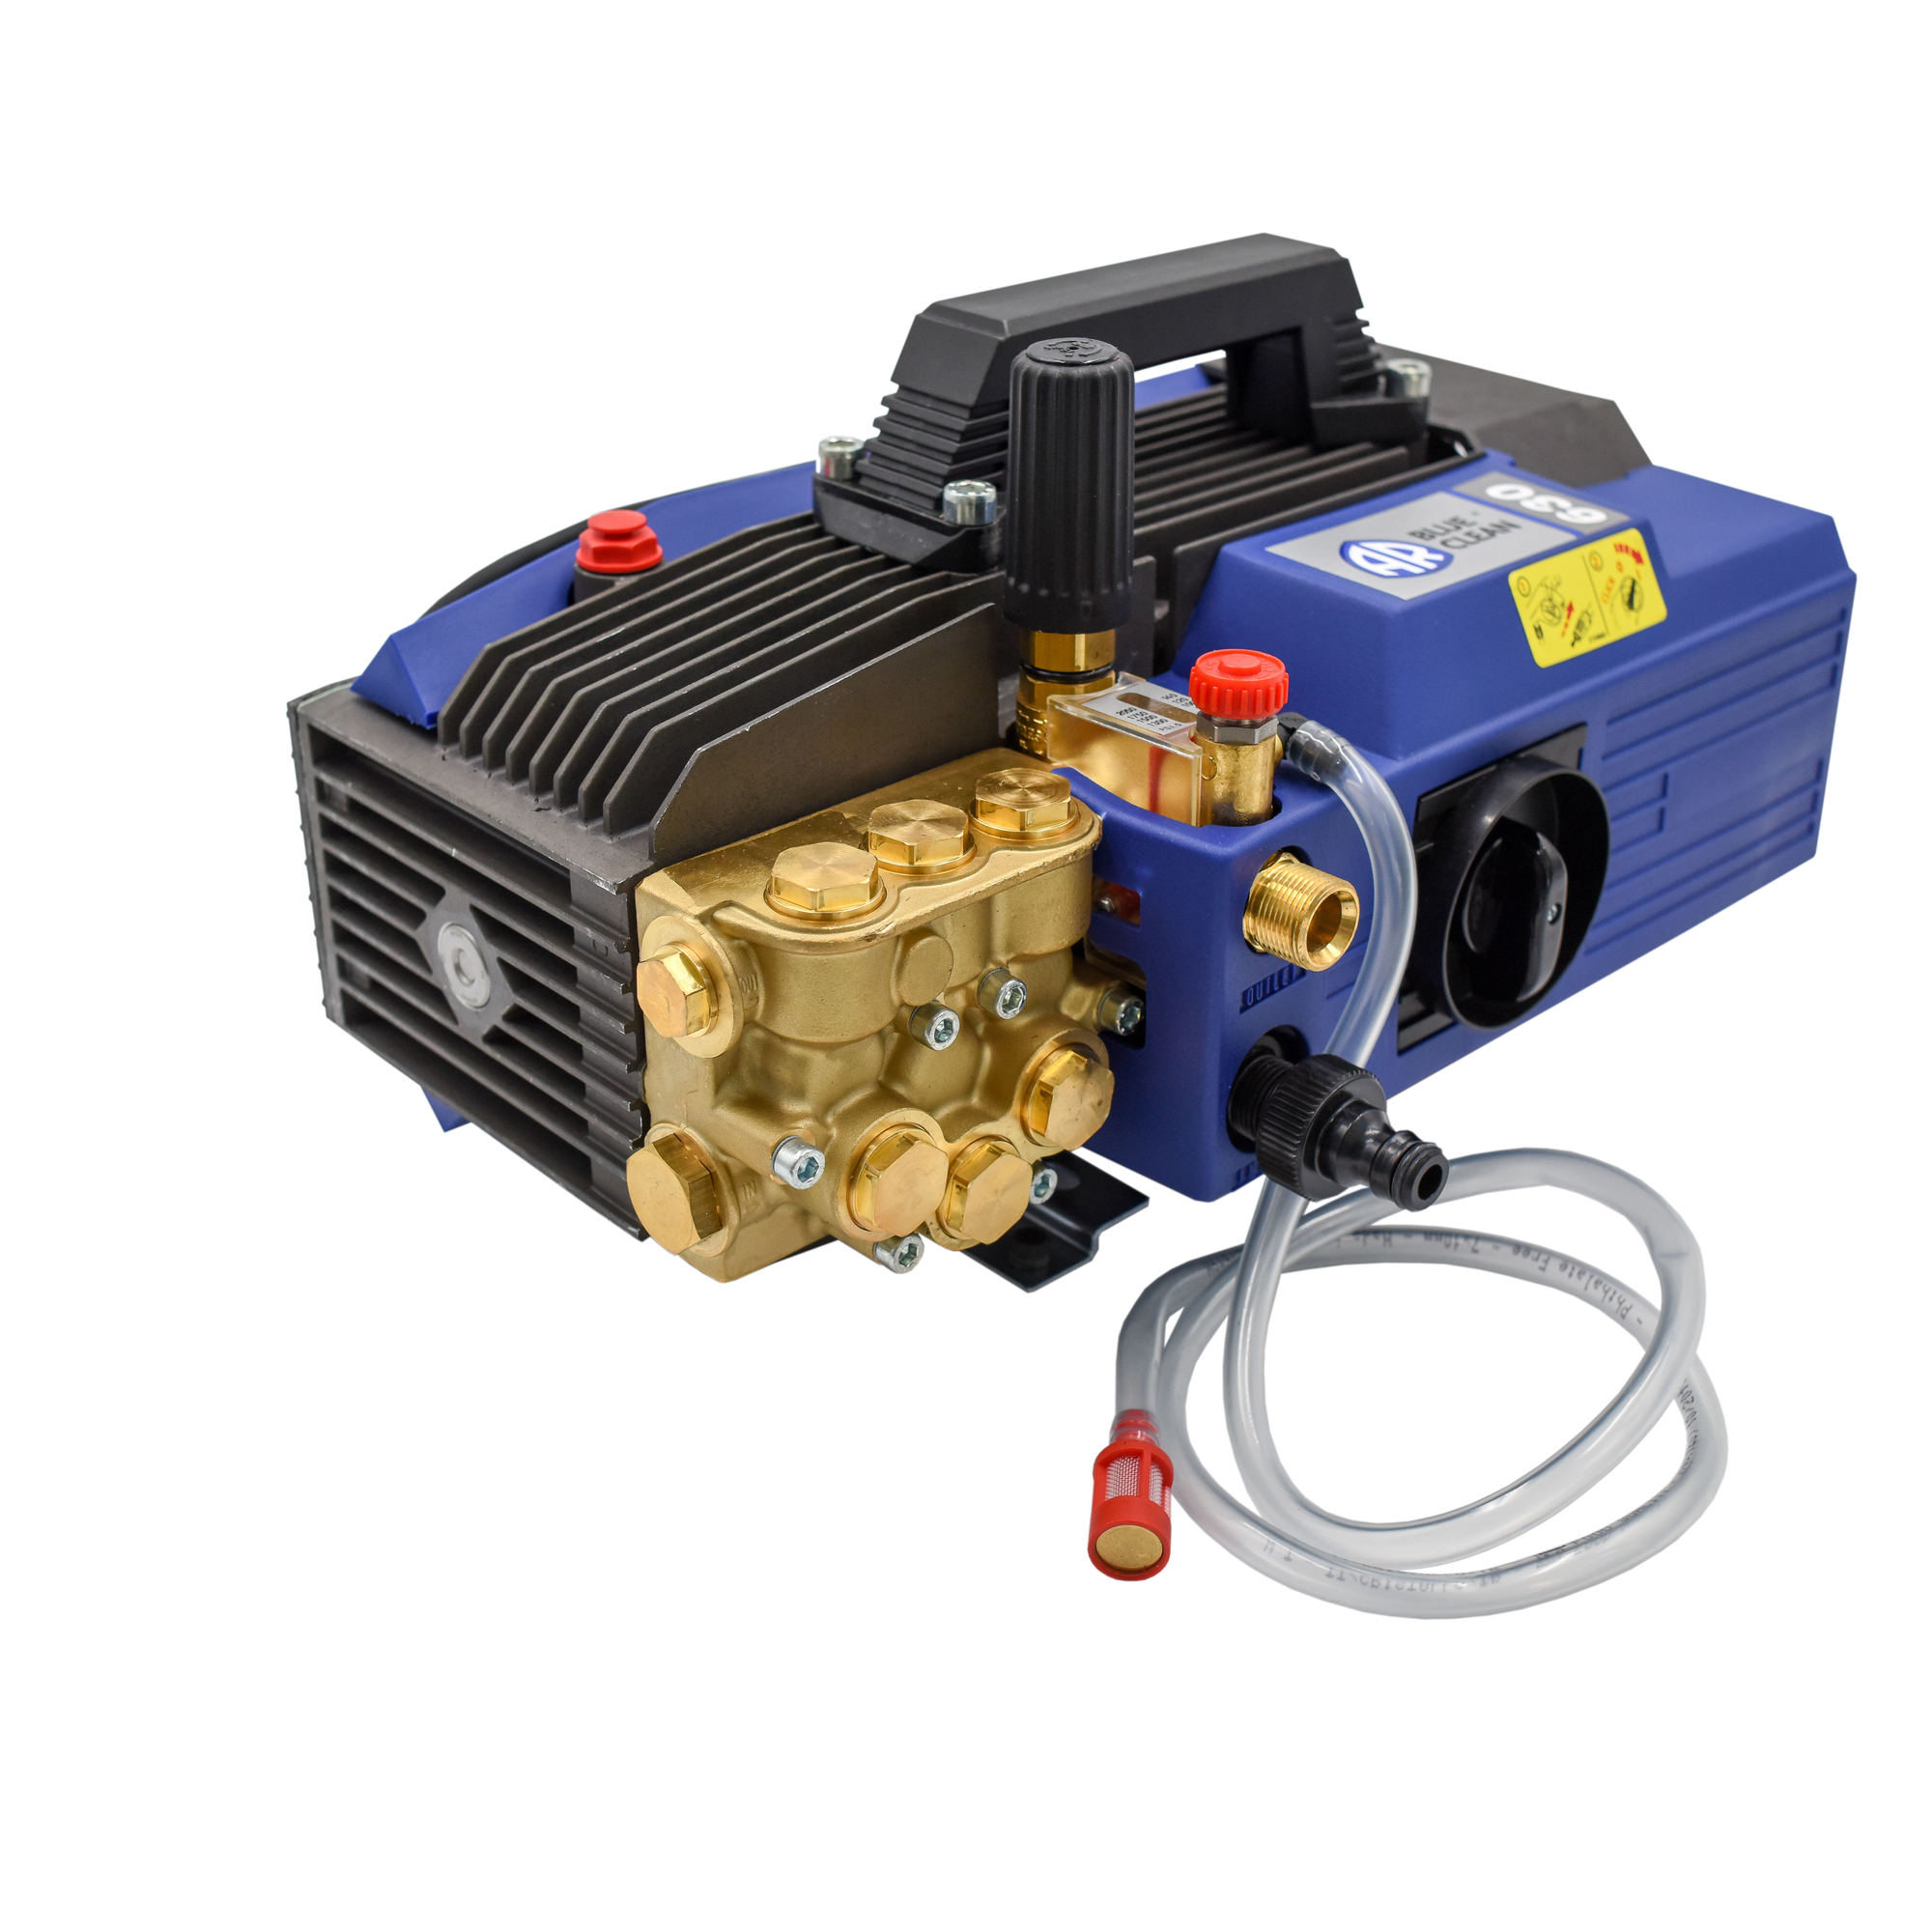 AR Blue Clean, Pro Pressure Washer 1900PSI, 2.1GPM, 20AMP, Pressure 1900 PSI, Flow 2.1 GPM, Volts 120 Model AR630TSS